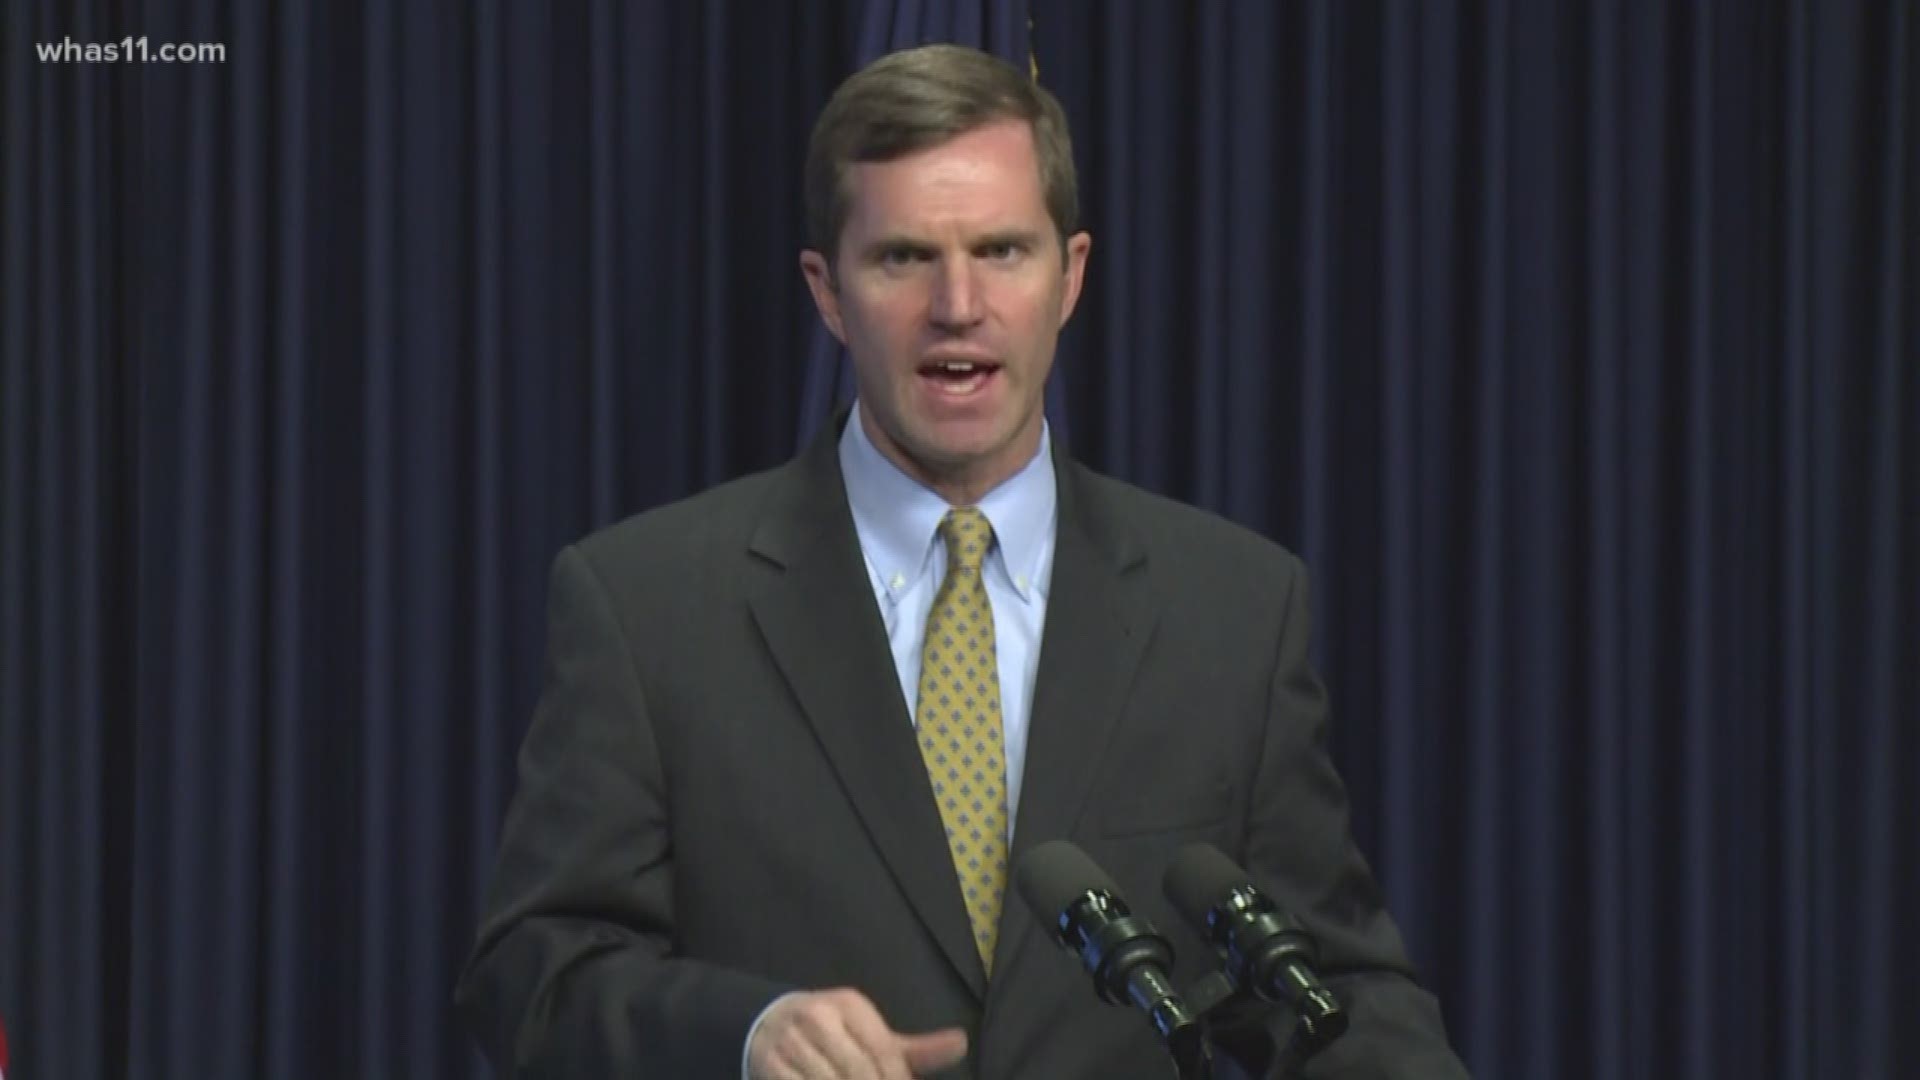 Governor Andy Beshear is working to reform Kentucky's criminal justice system.